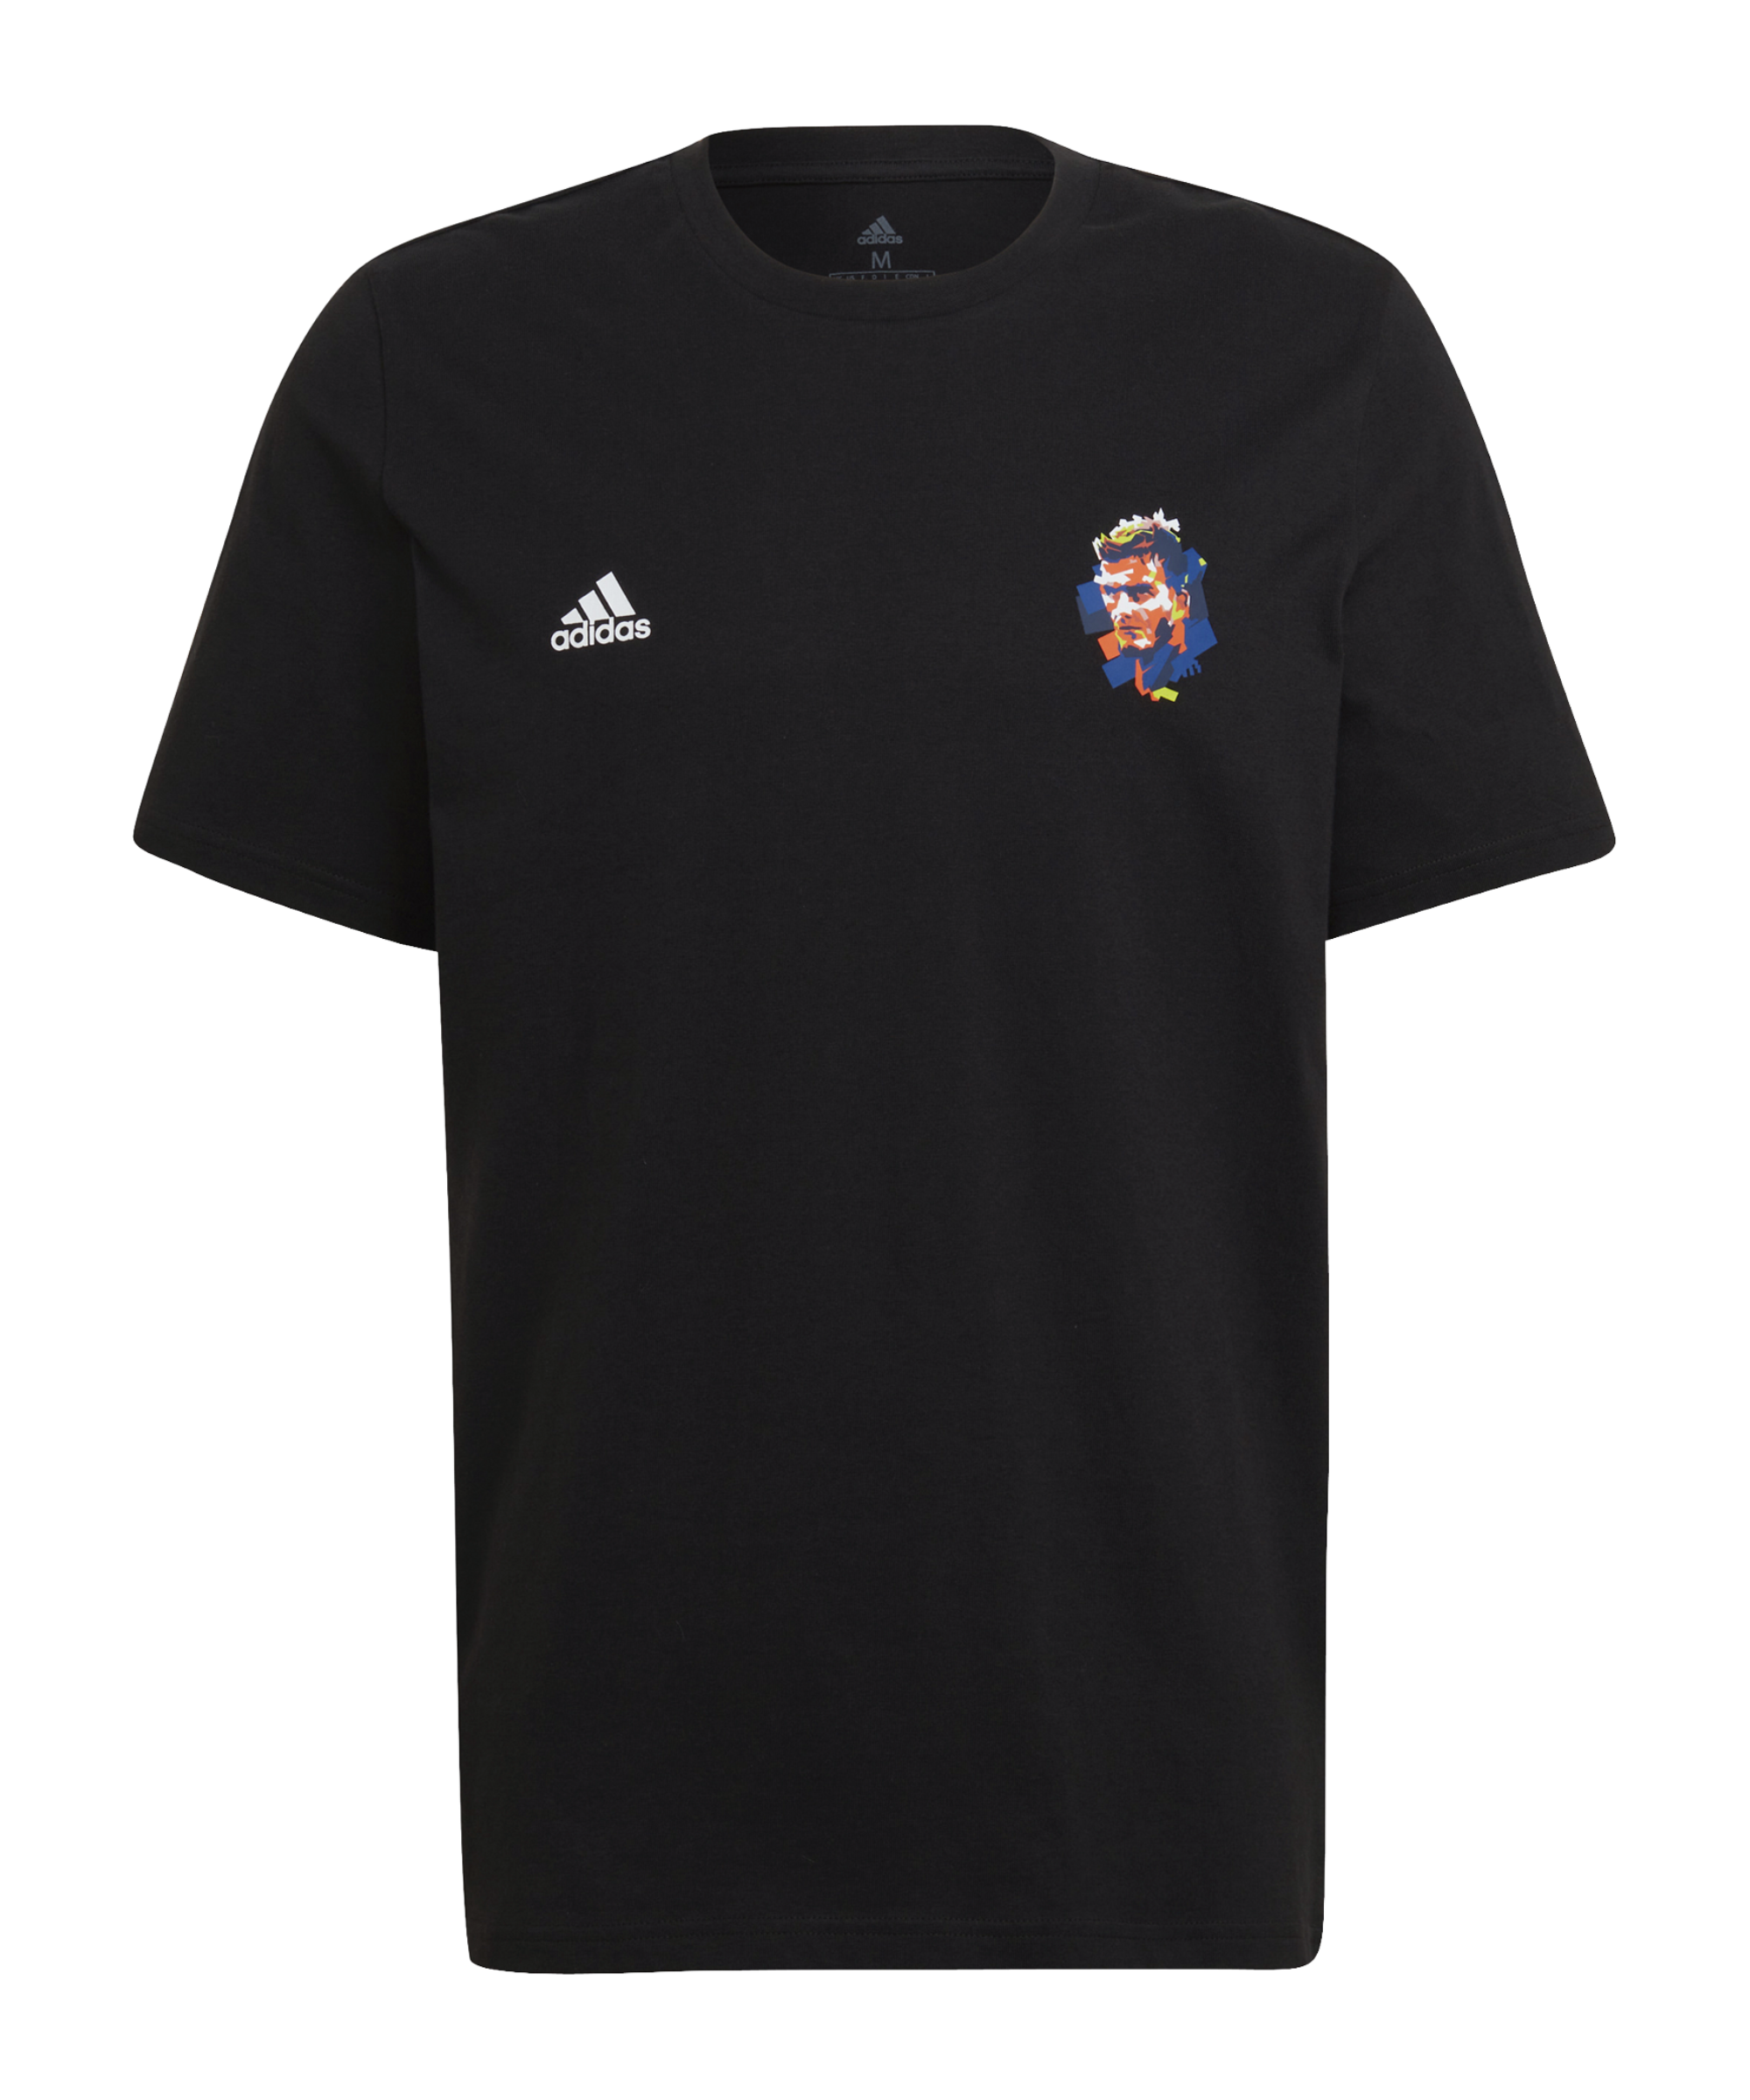 Spain Icon Goalkeeper Shirt By Adidas - I Got One! Here's What